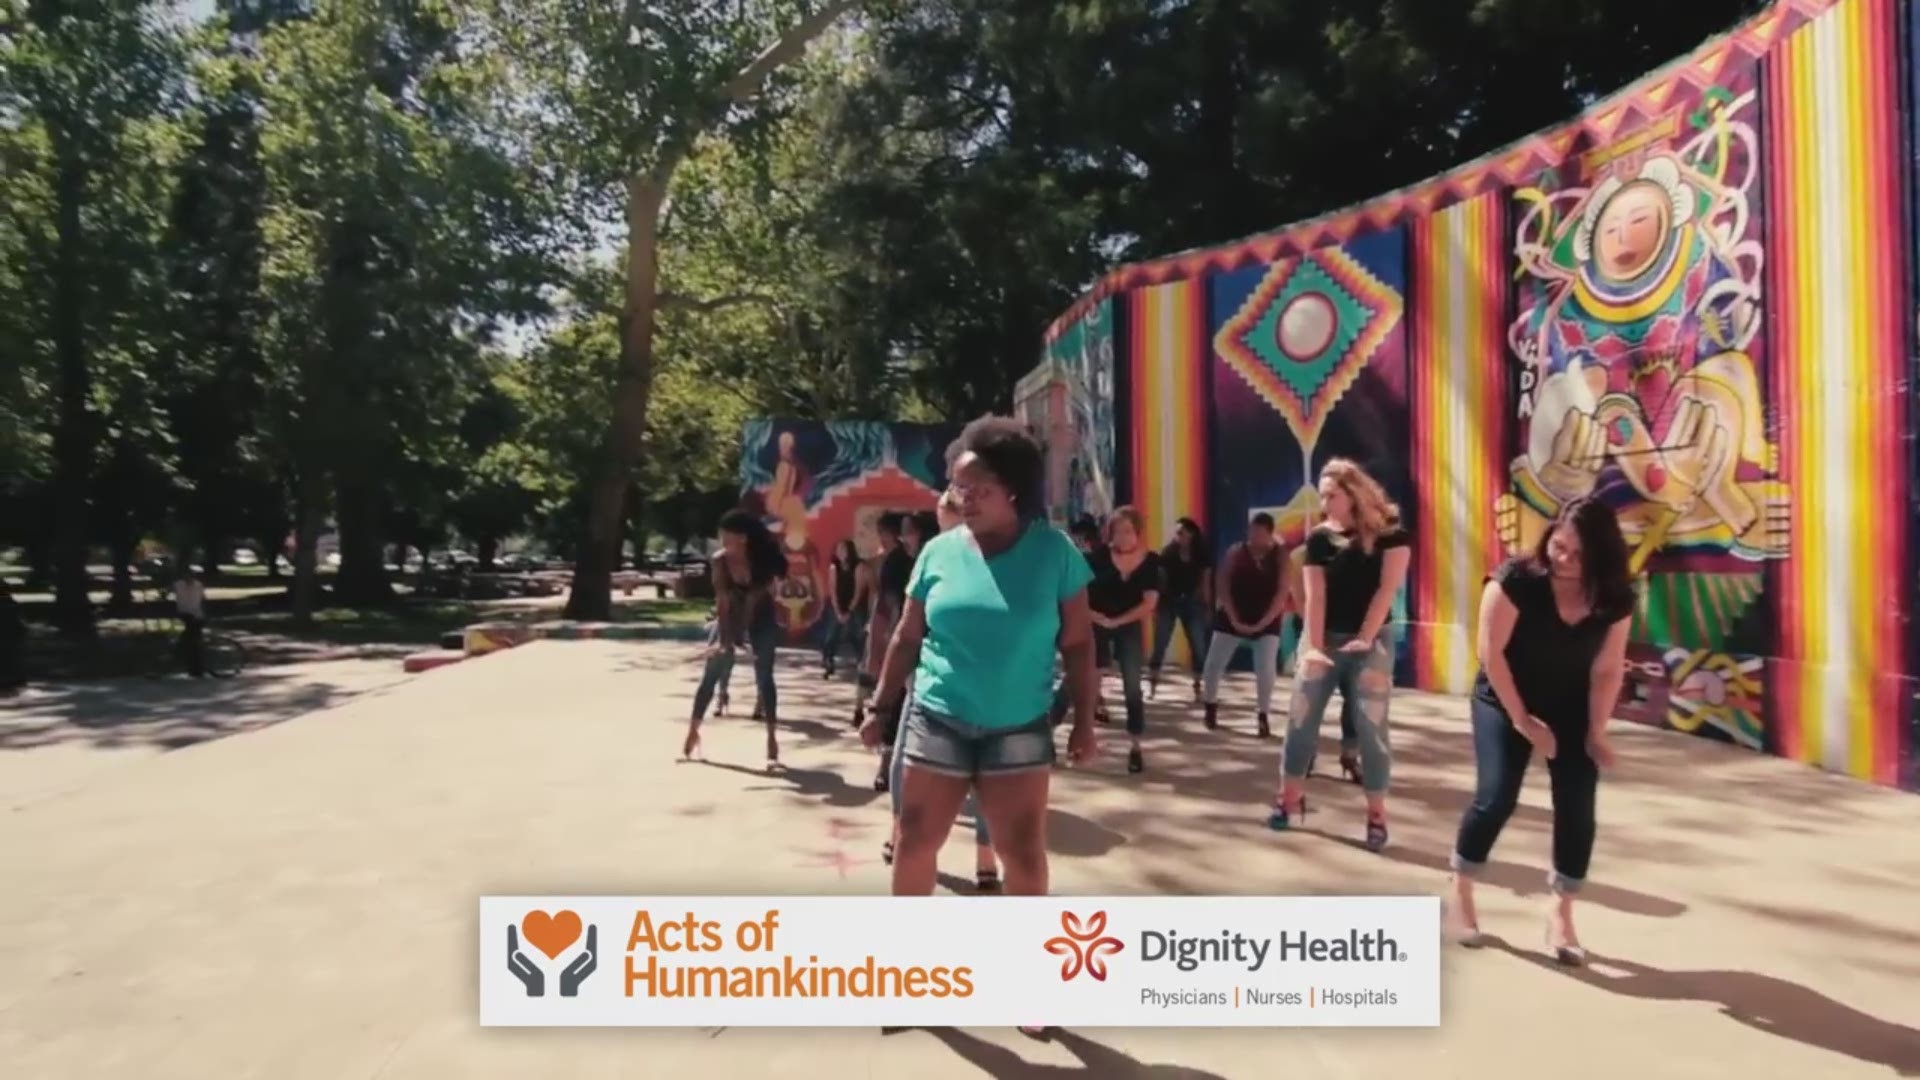 Acts of Humankindness is sponsored by Dignity Health.